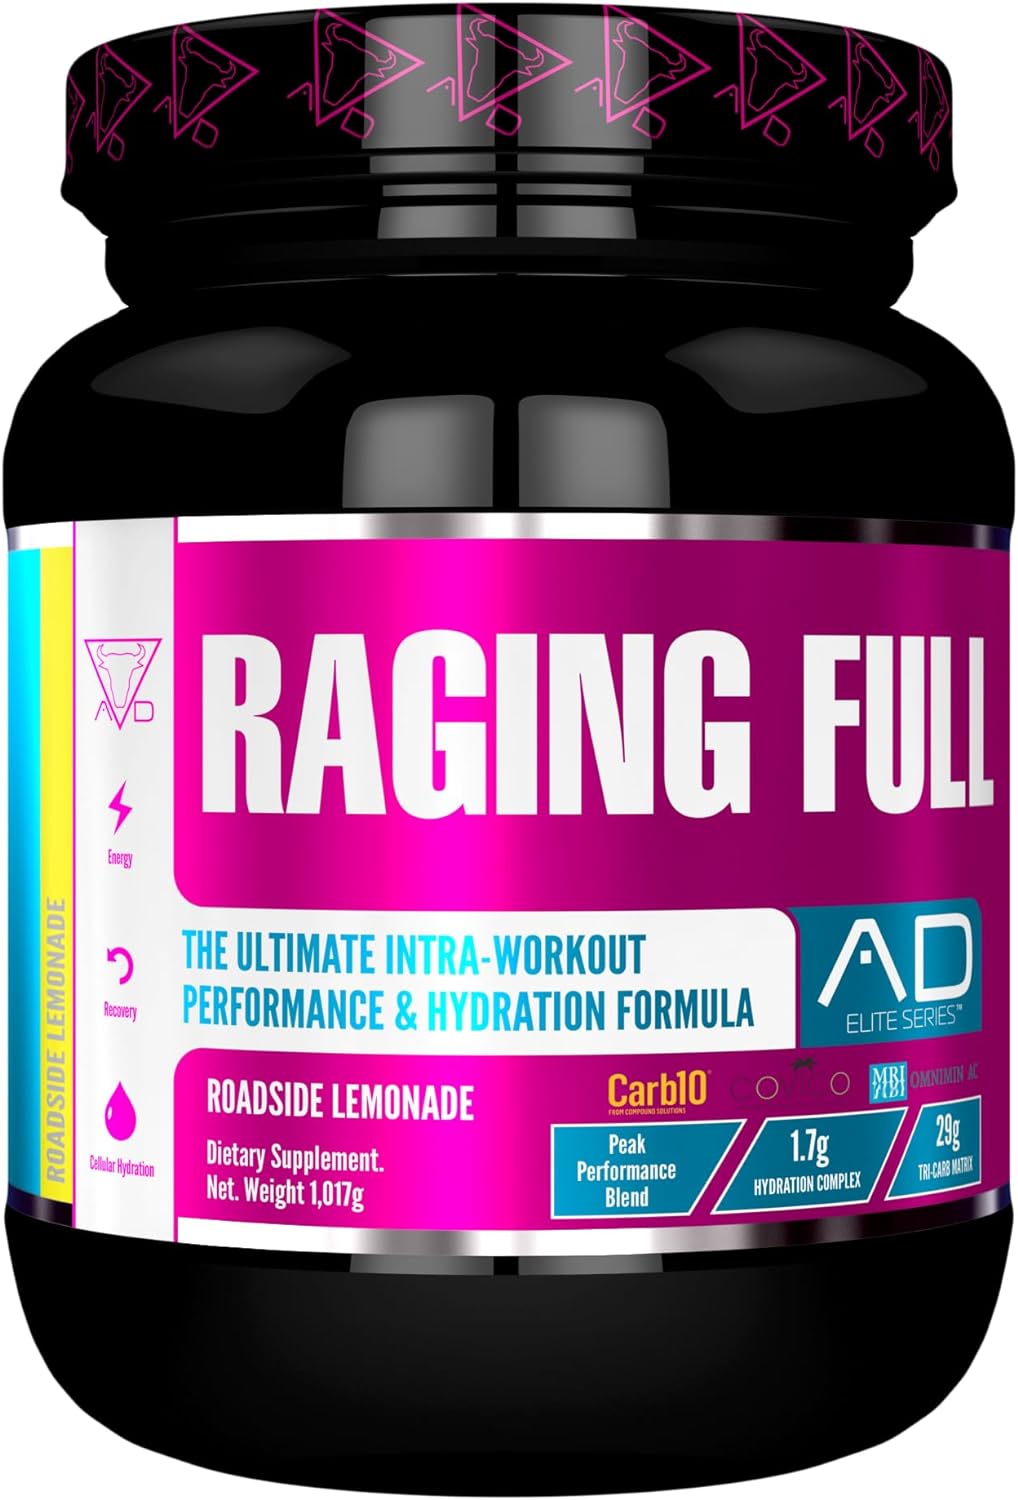 Project AD Raging Full Ultimate Intra-Workout Performance and Hydratio